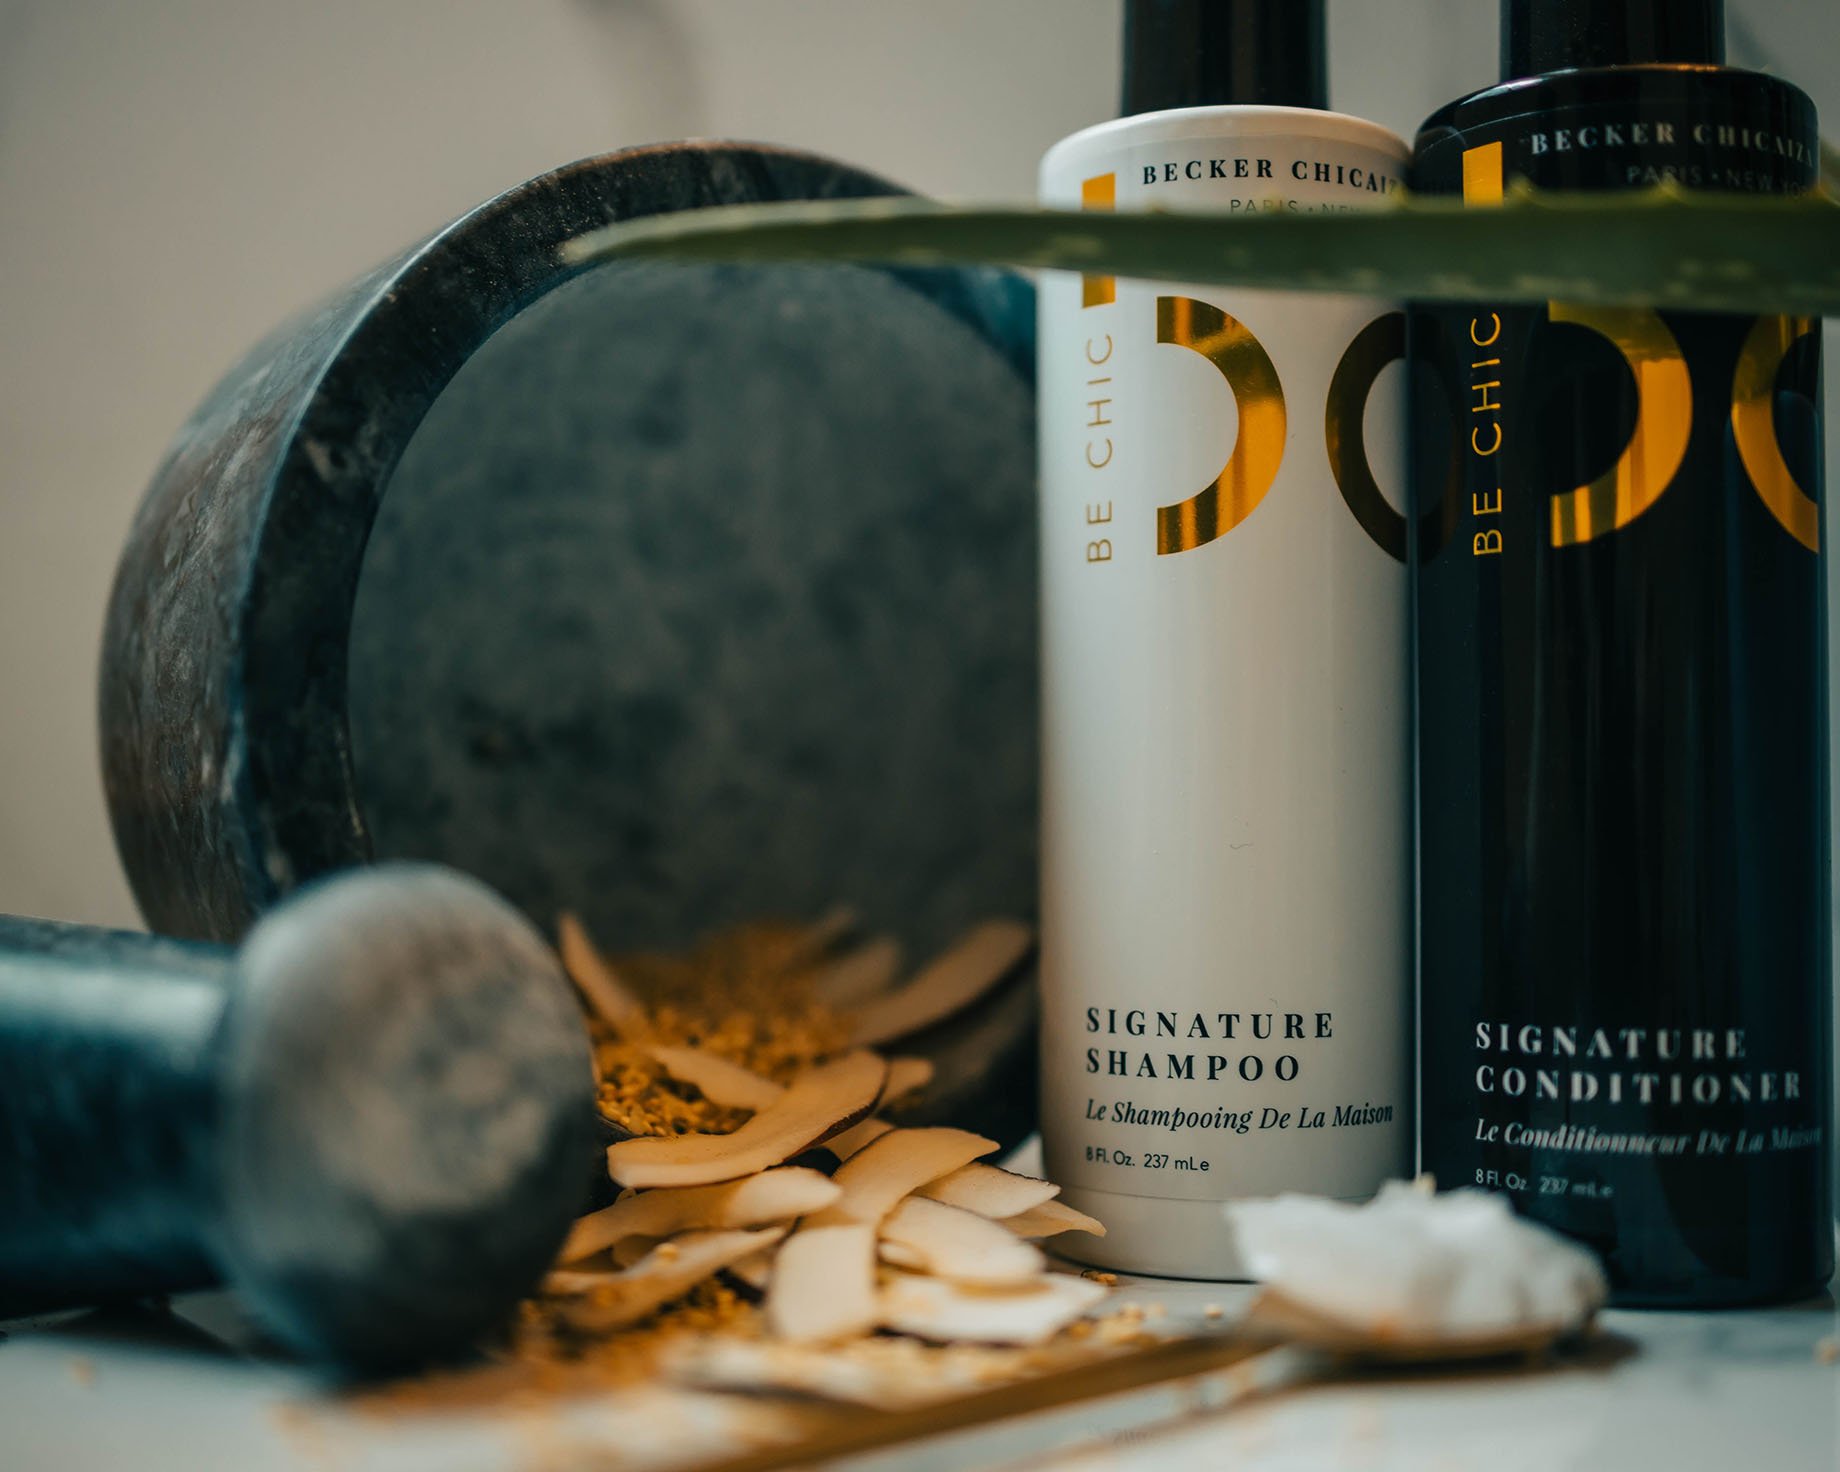 Be Chic's Signature Shampoo and Conditioner next to a mortar and pestle with coconut oil and flakes shot by Chad Savage